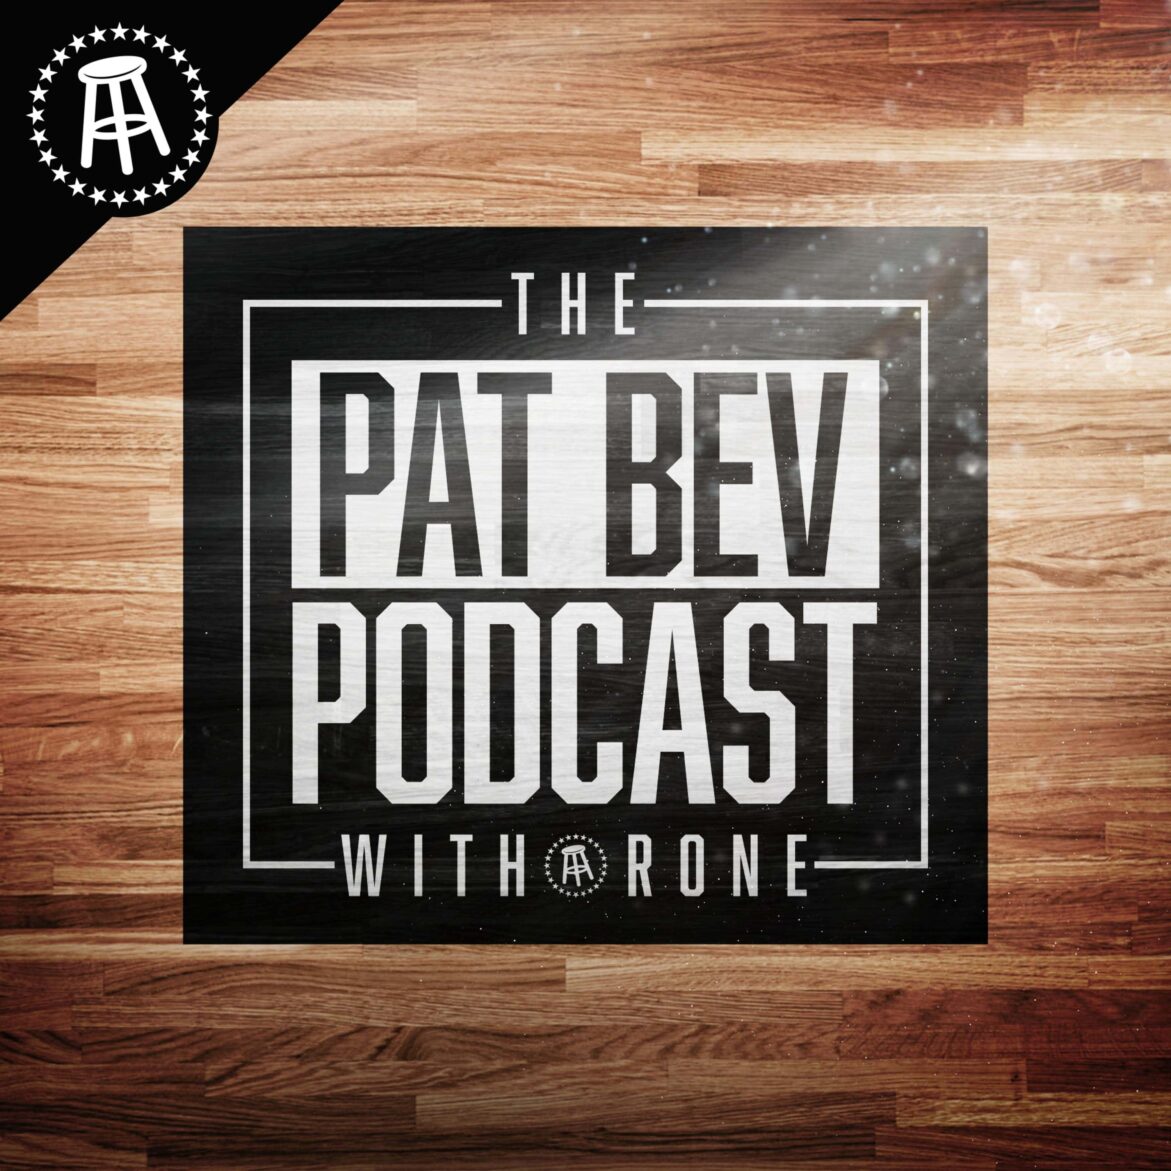 Black Podcasting - The Truth Hurts and I Ain't Told No Lie Yet feat. Charleston White - The Pat Bev Podcast with Rone: Ep. 15